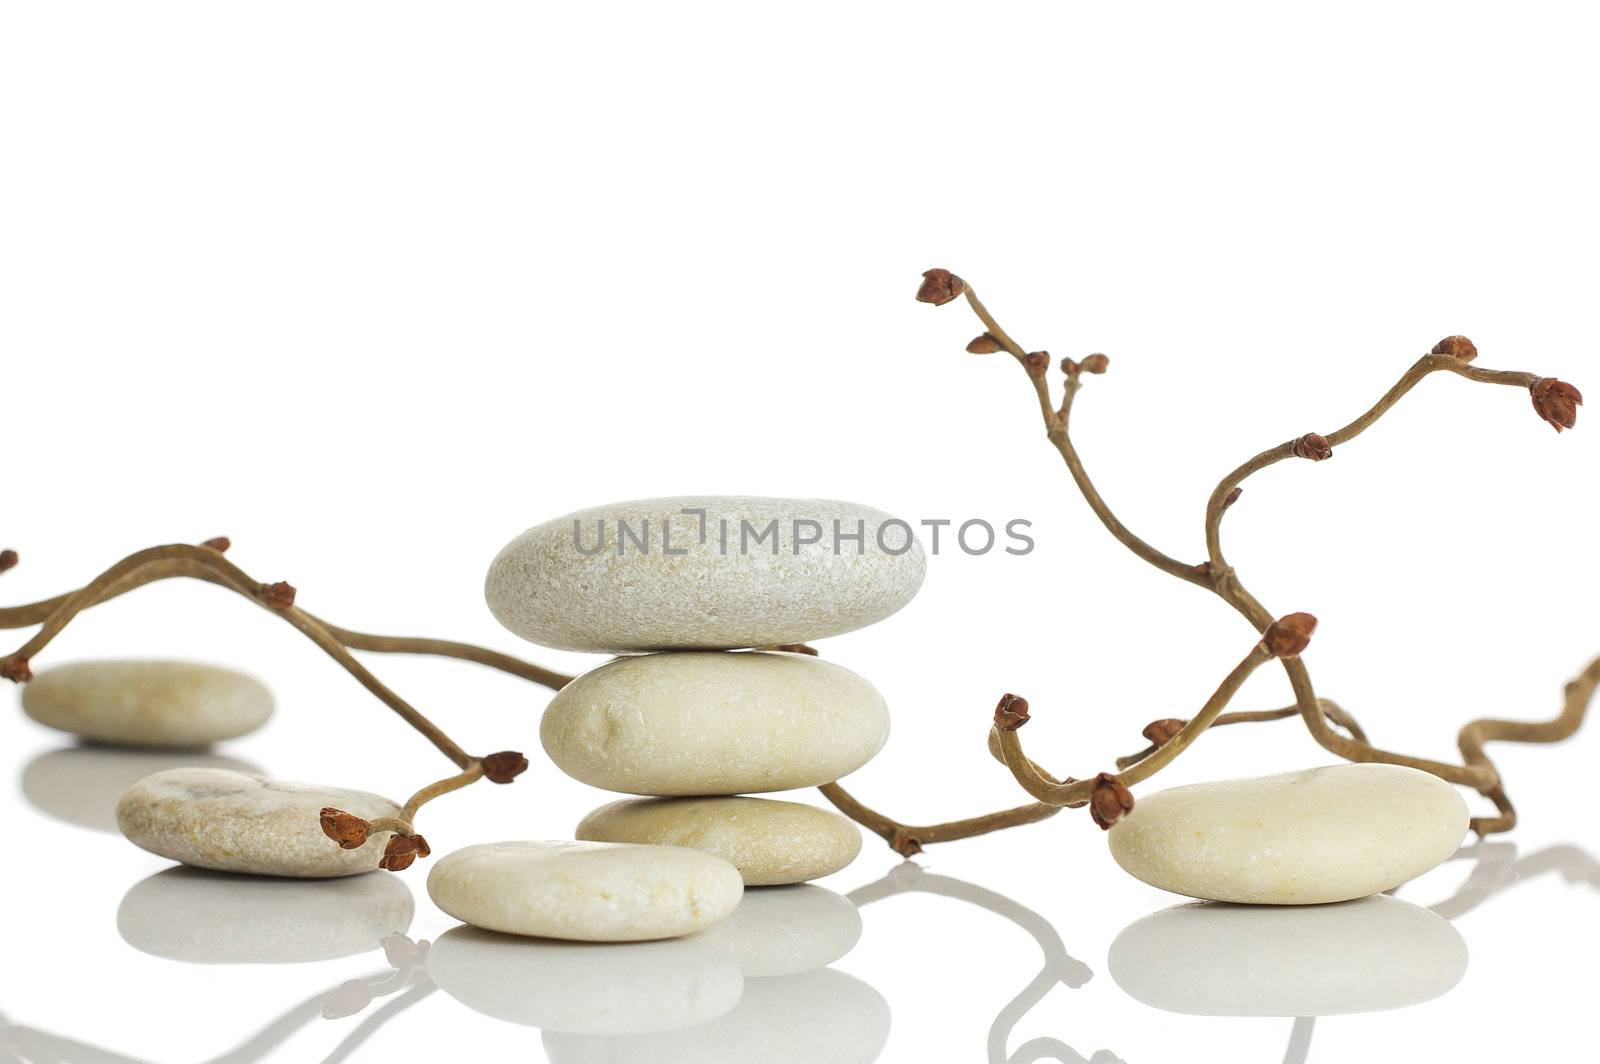 Spa stones and dry hazel branches, isolated on white background.